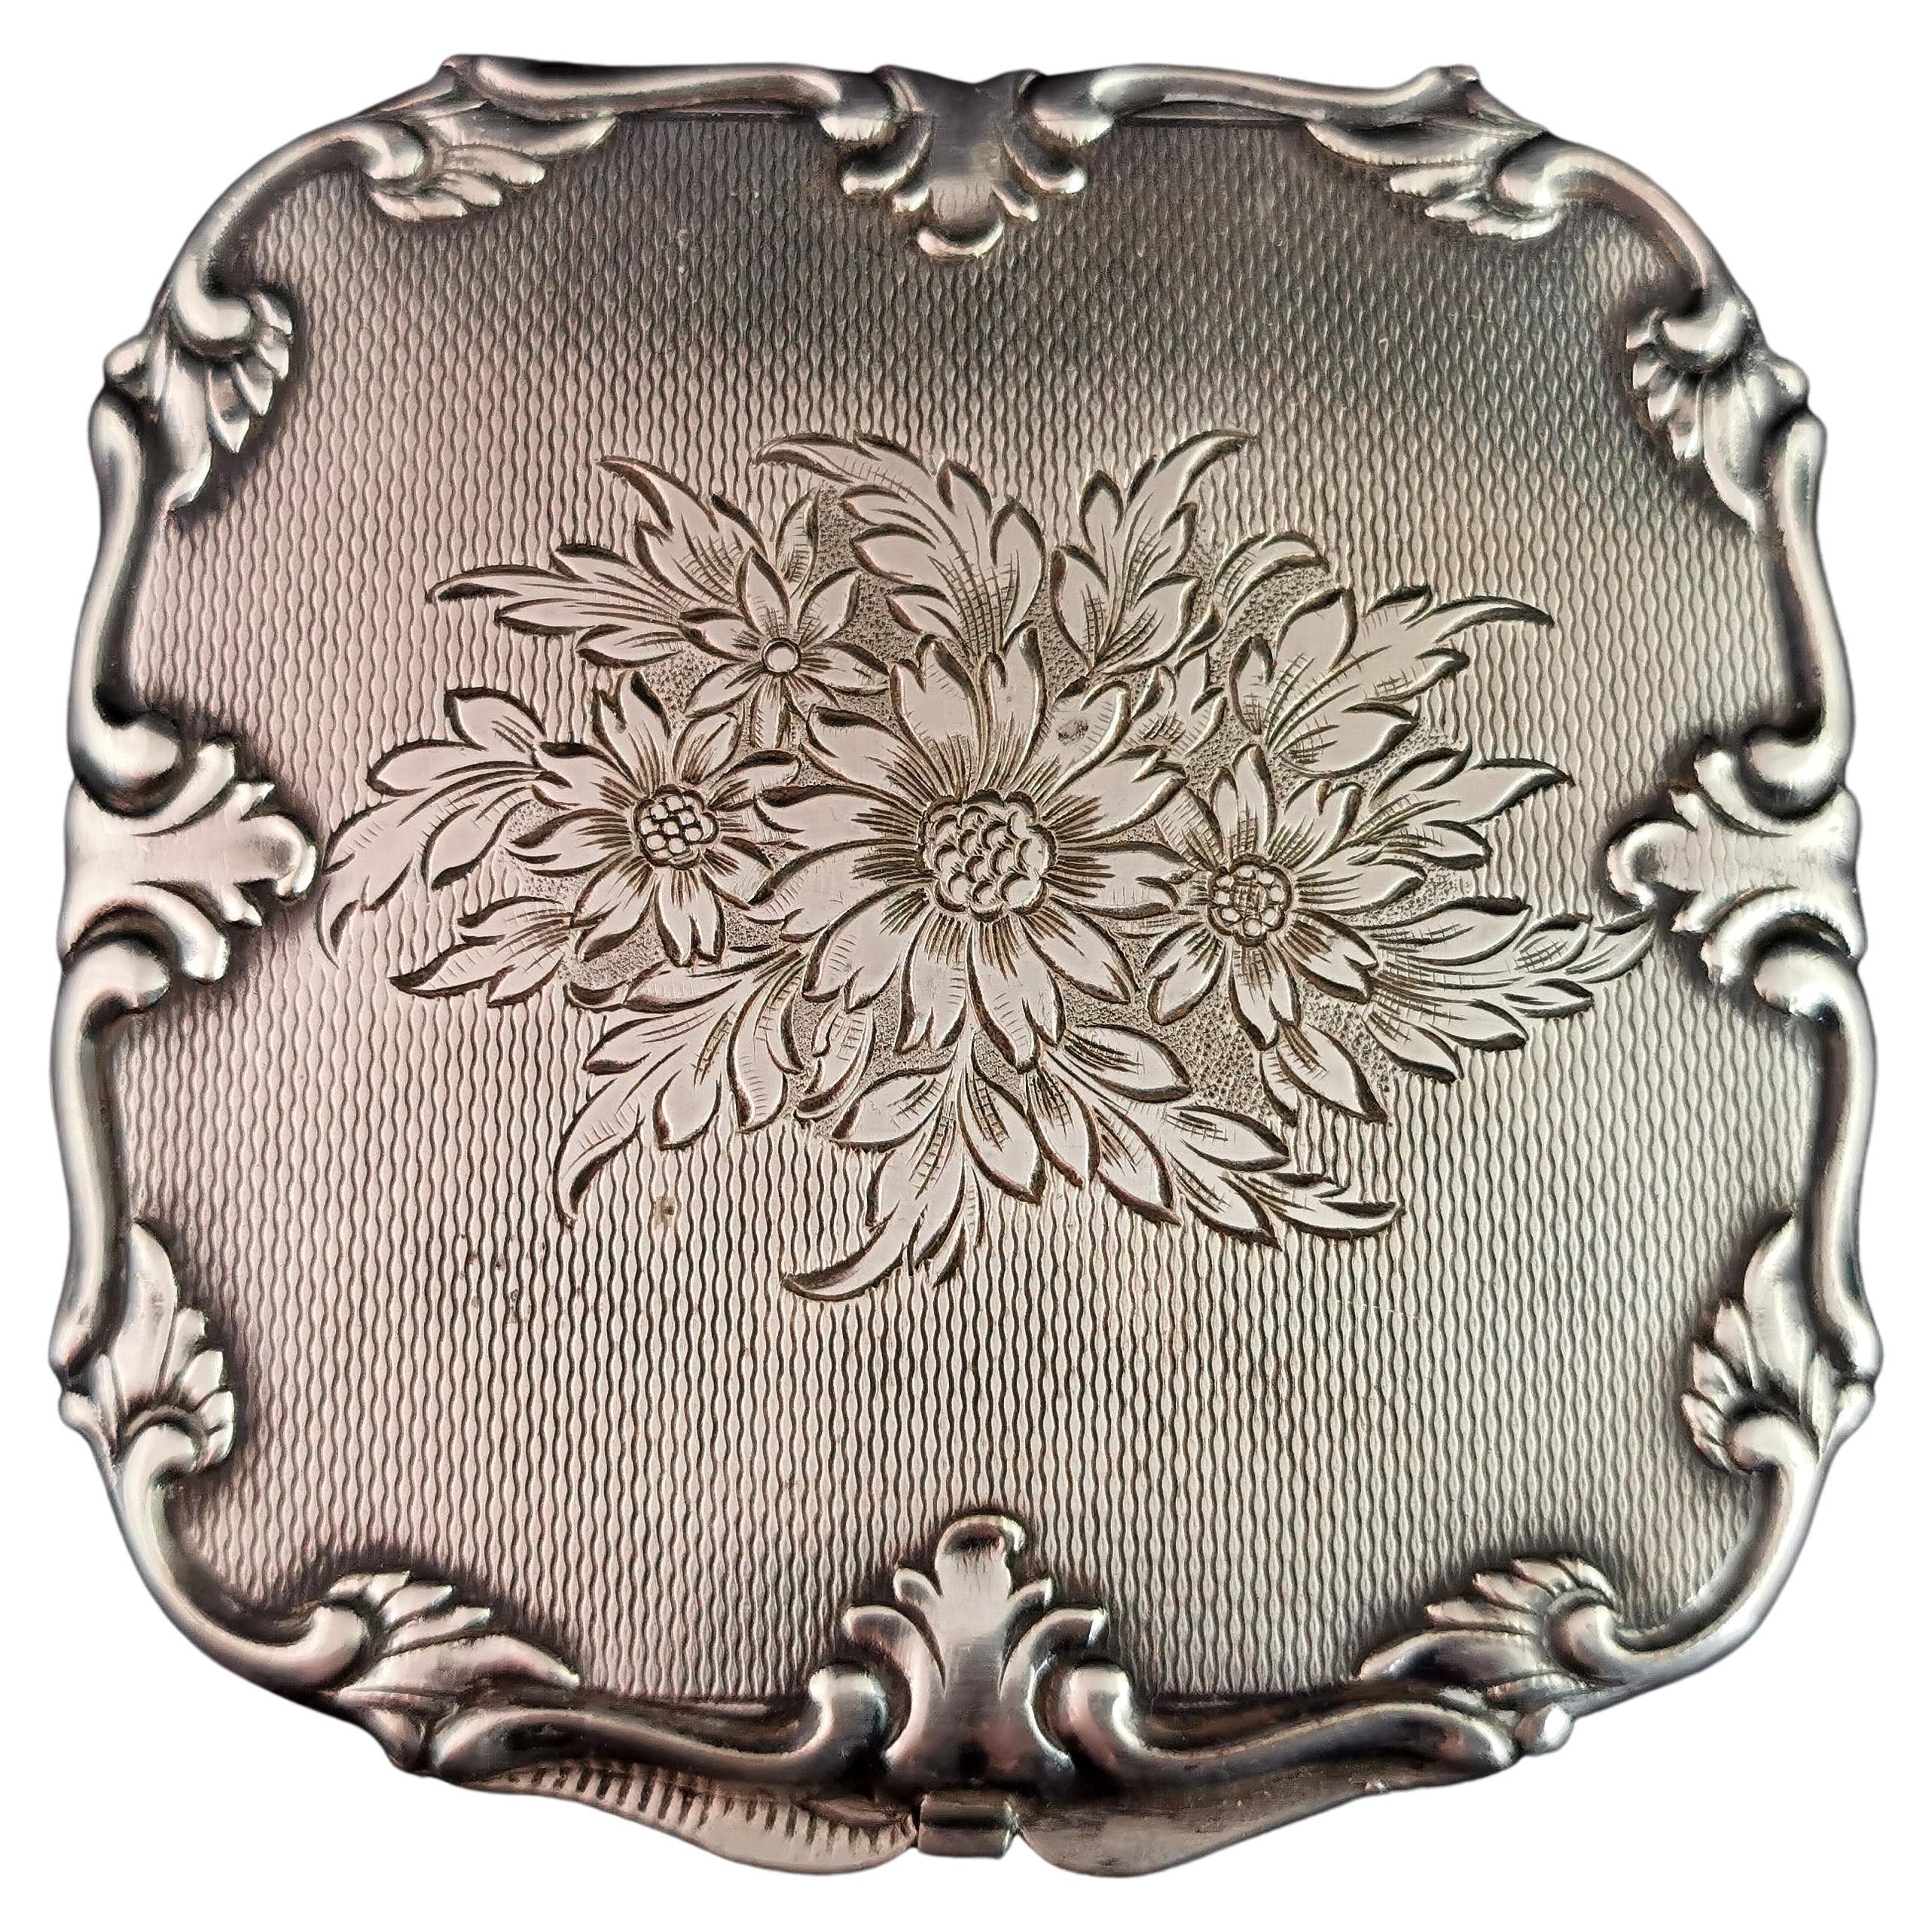 A gorgeous vintage mid century, silver tone metal powder compact.

It has a slightly wavy edge with a slightly raised repousse rim, engine turned design front and back with a floral motif to the top.

Inside it has an internal compartment for powder